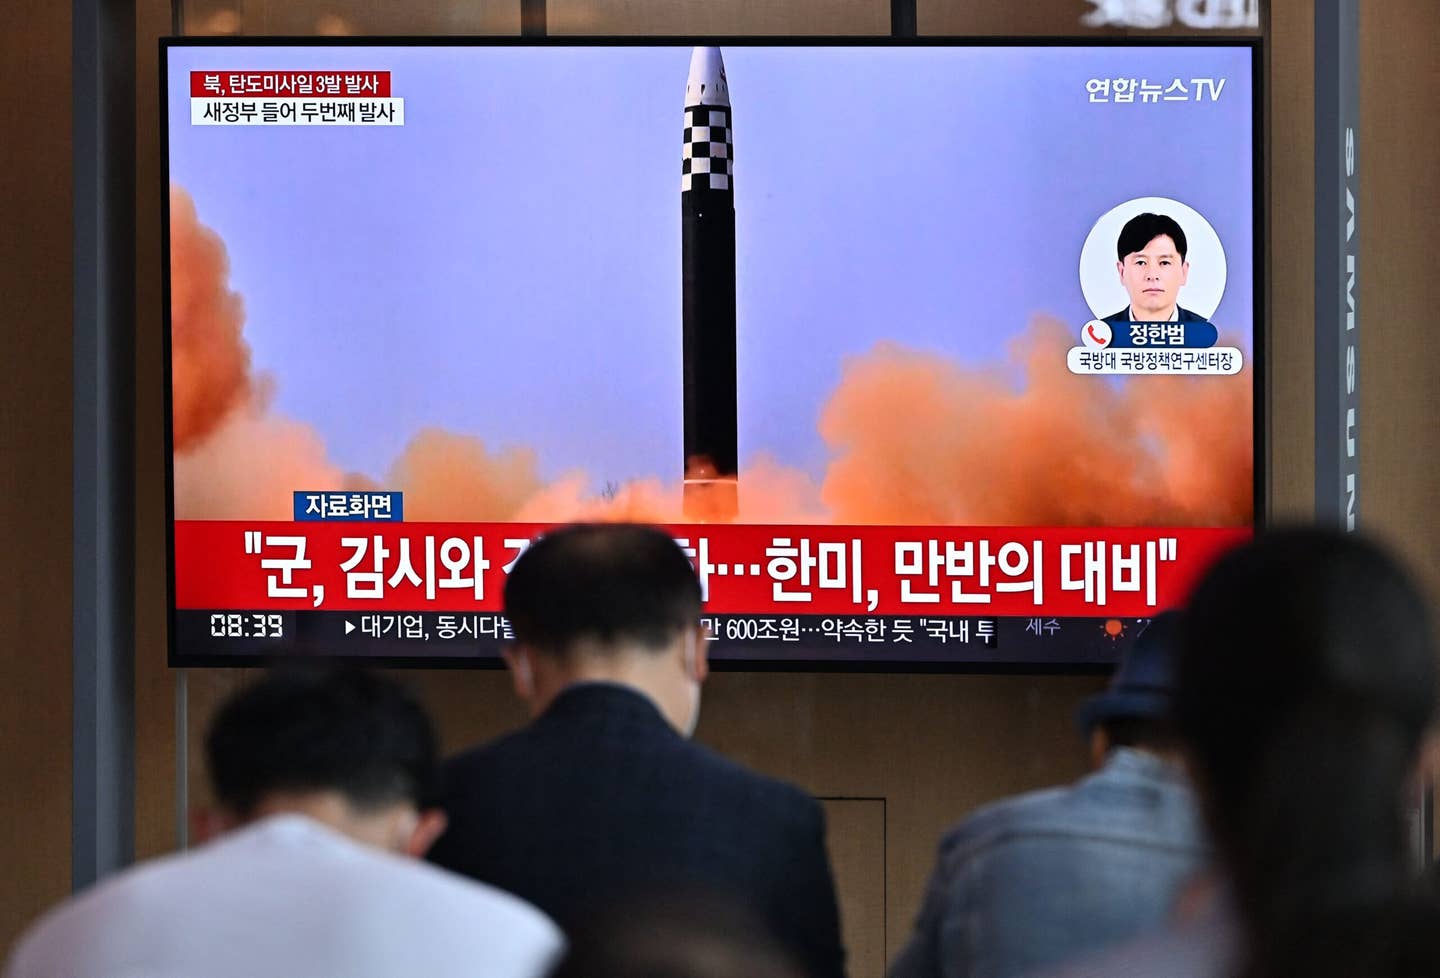 People watch a television screen showing a news broadcast with file footage of a North Korean missile test, at a railway station in Seoul on May 25, 2022, after North Korea fired three ballistic missiles toward the Sea of Japan. <em>Photo by JUNG YEON-JE/AFP via Getty Images</em>